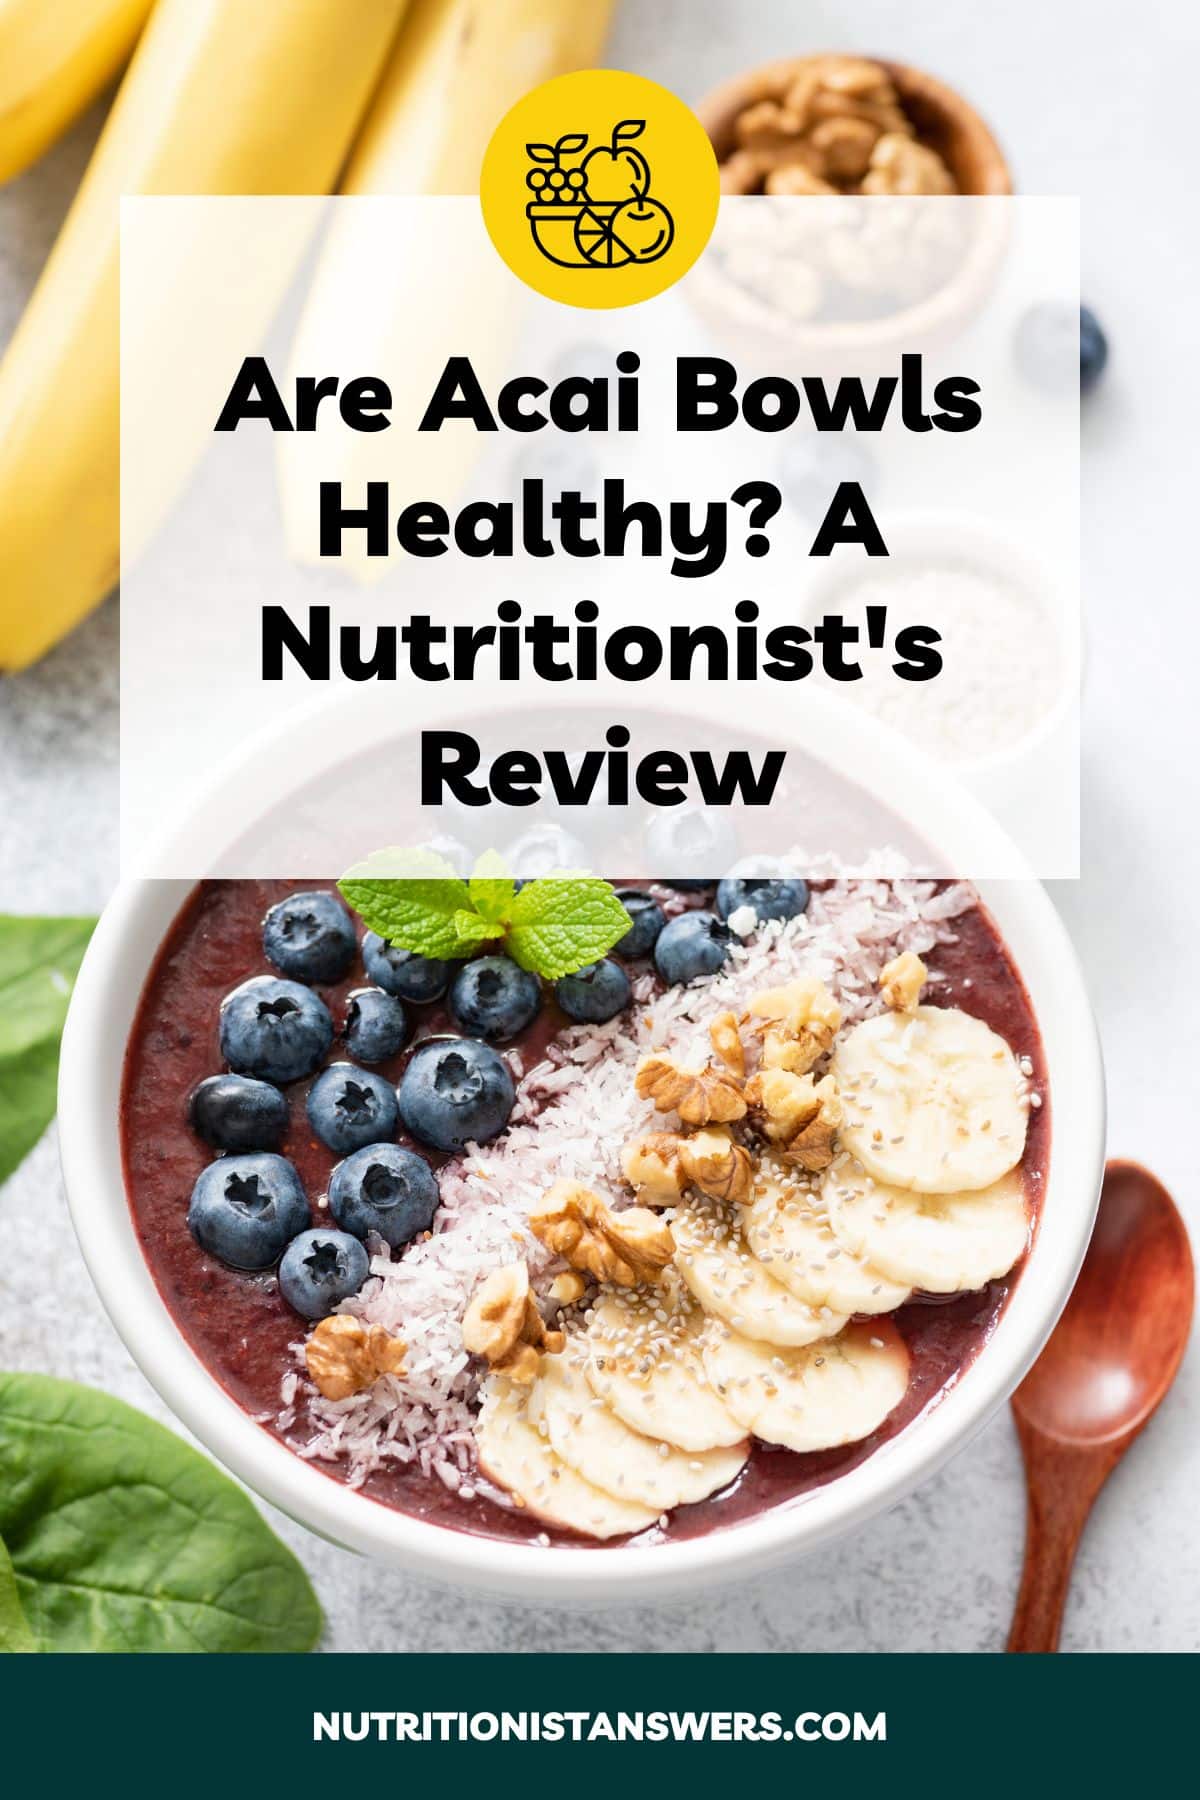 Are Acai Bowls Healthy? A Nutritionist's Review